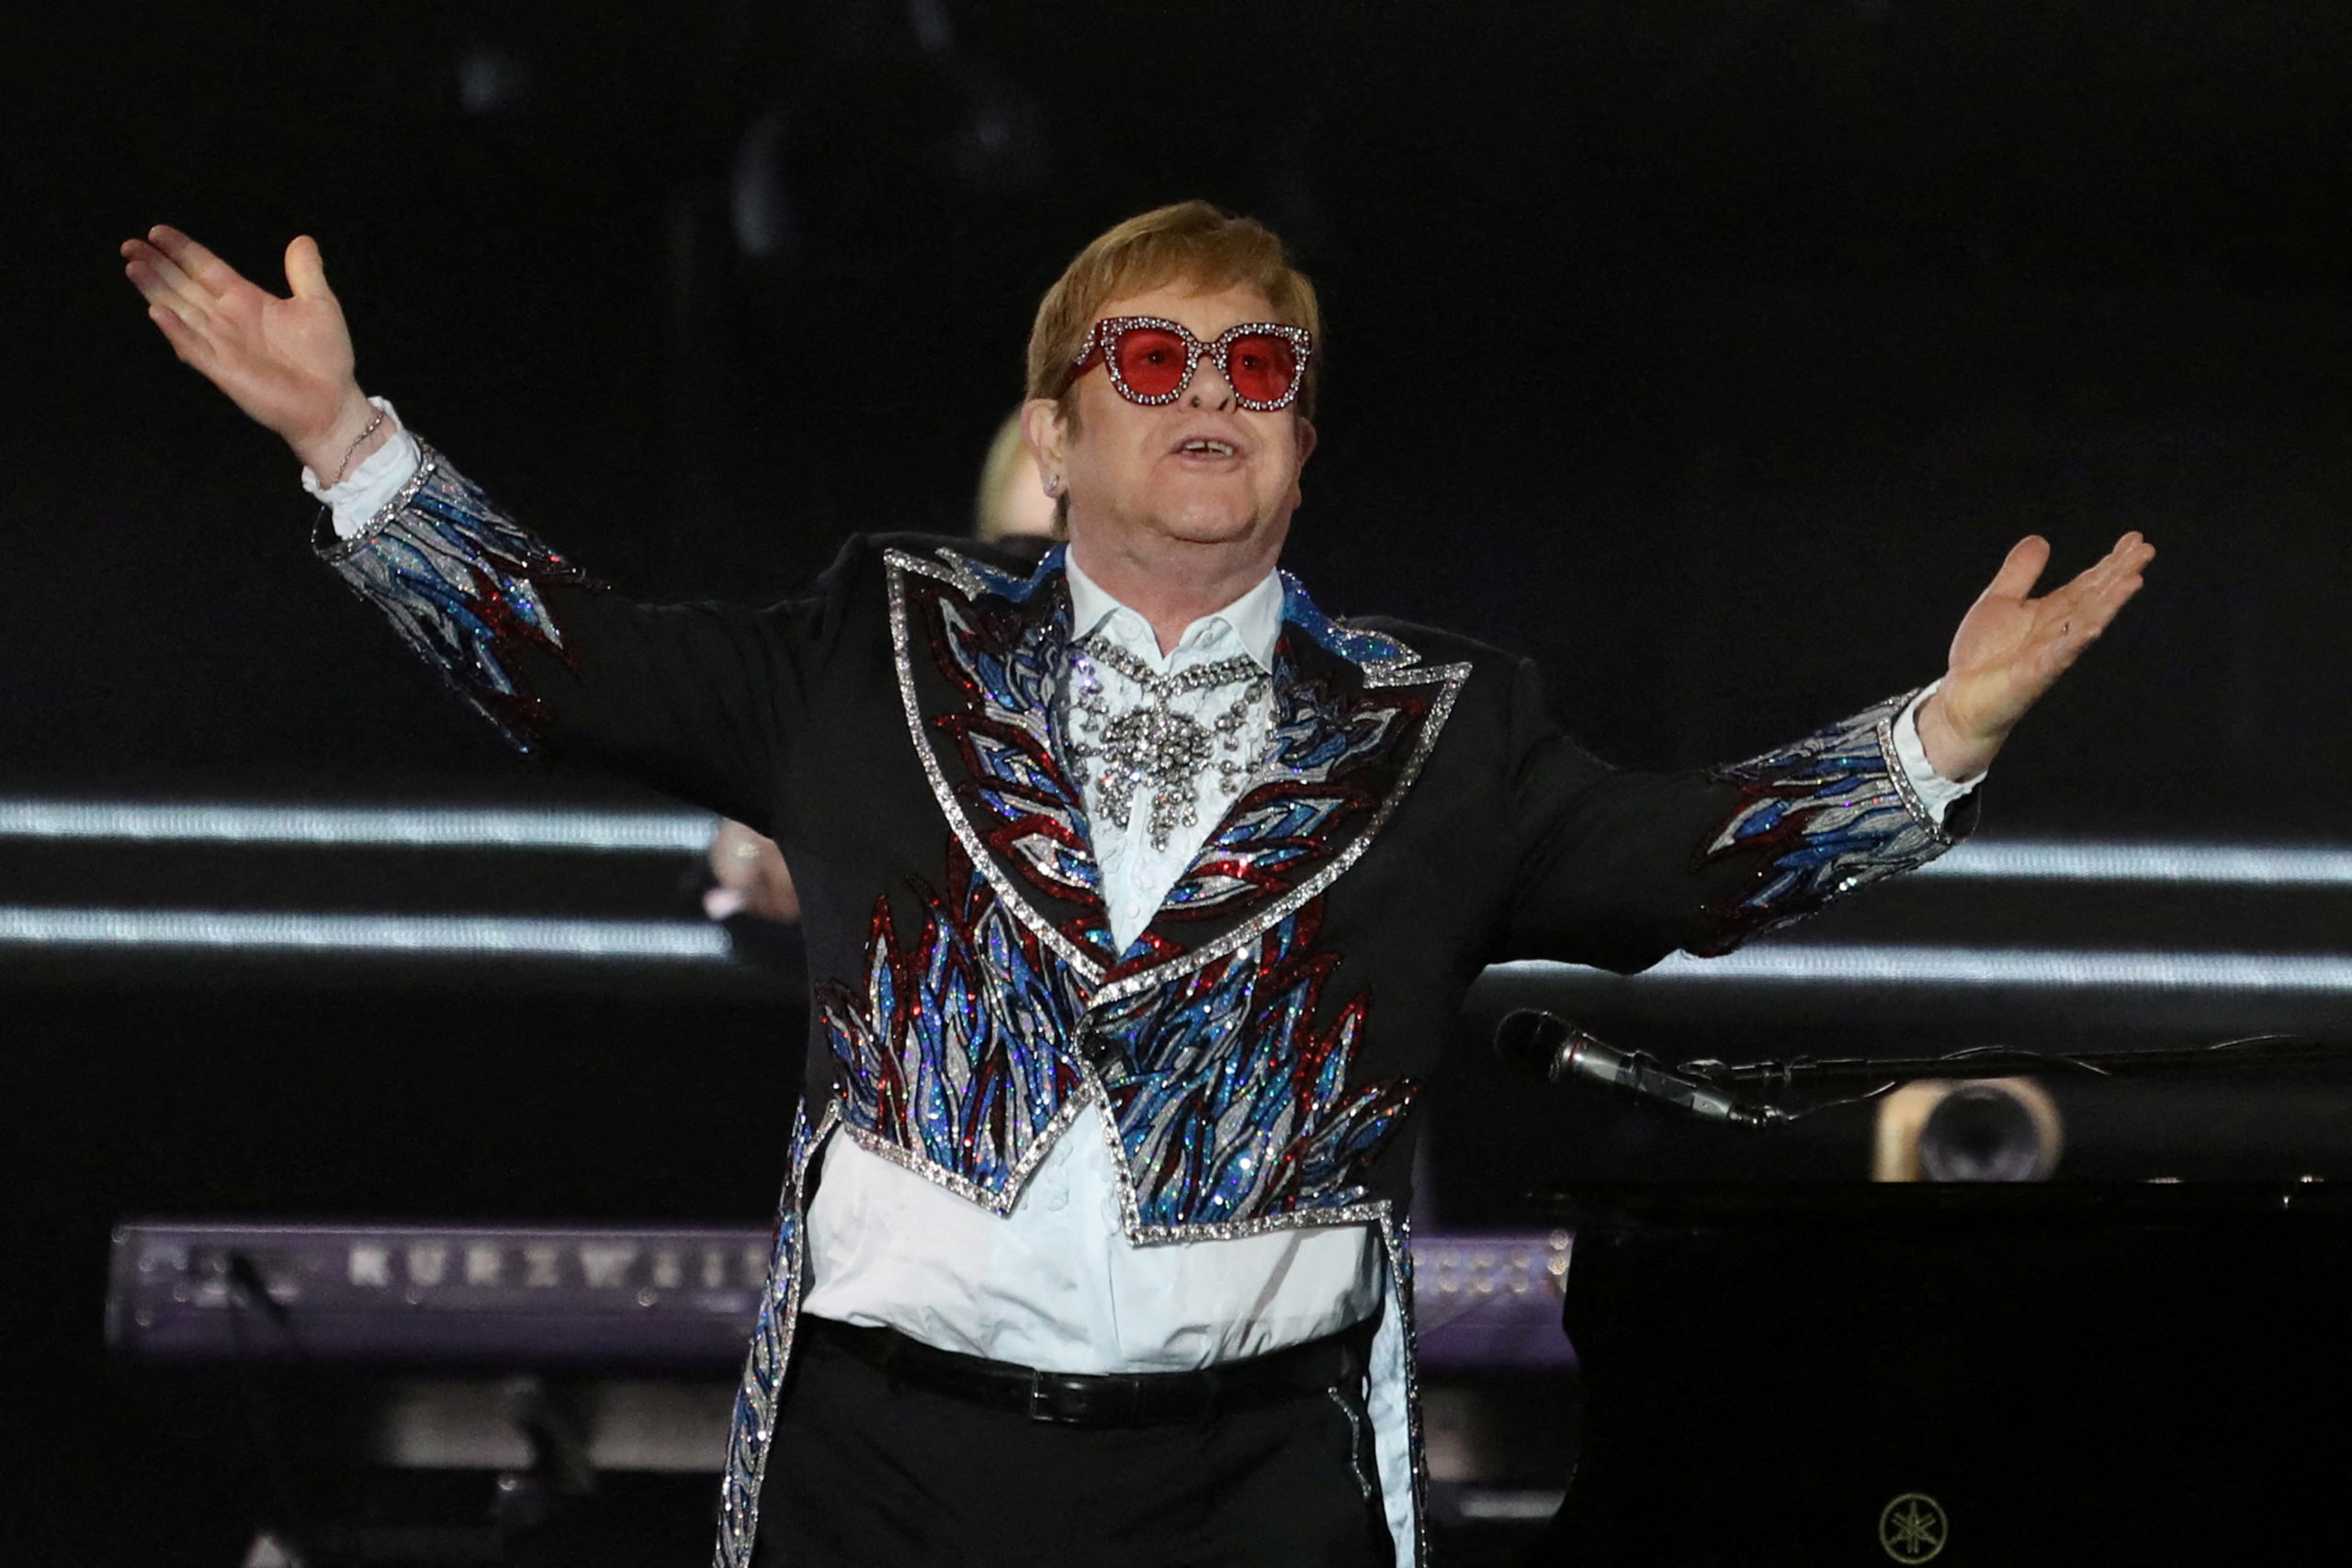 Elton John performs "Bennie and the Jets" as he wraps up the U.S. leg of his 'Yellow Brick Road' tour at Dodger Stadium in Los Angeles, California, U.S. November 20, 2022.  REUTERS/David Swanson